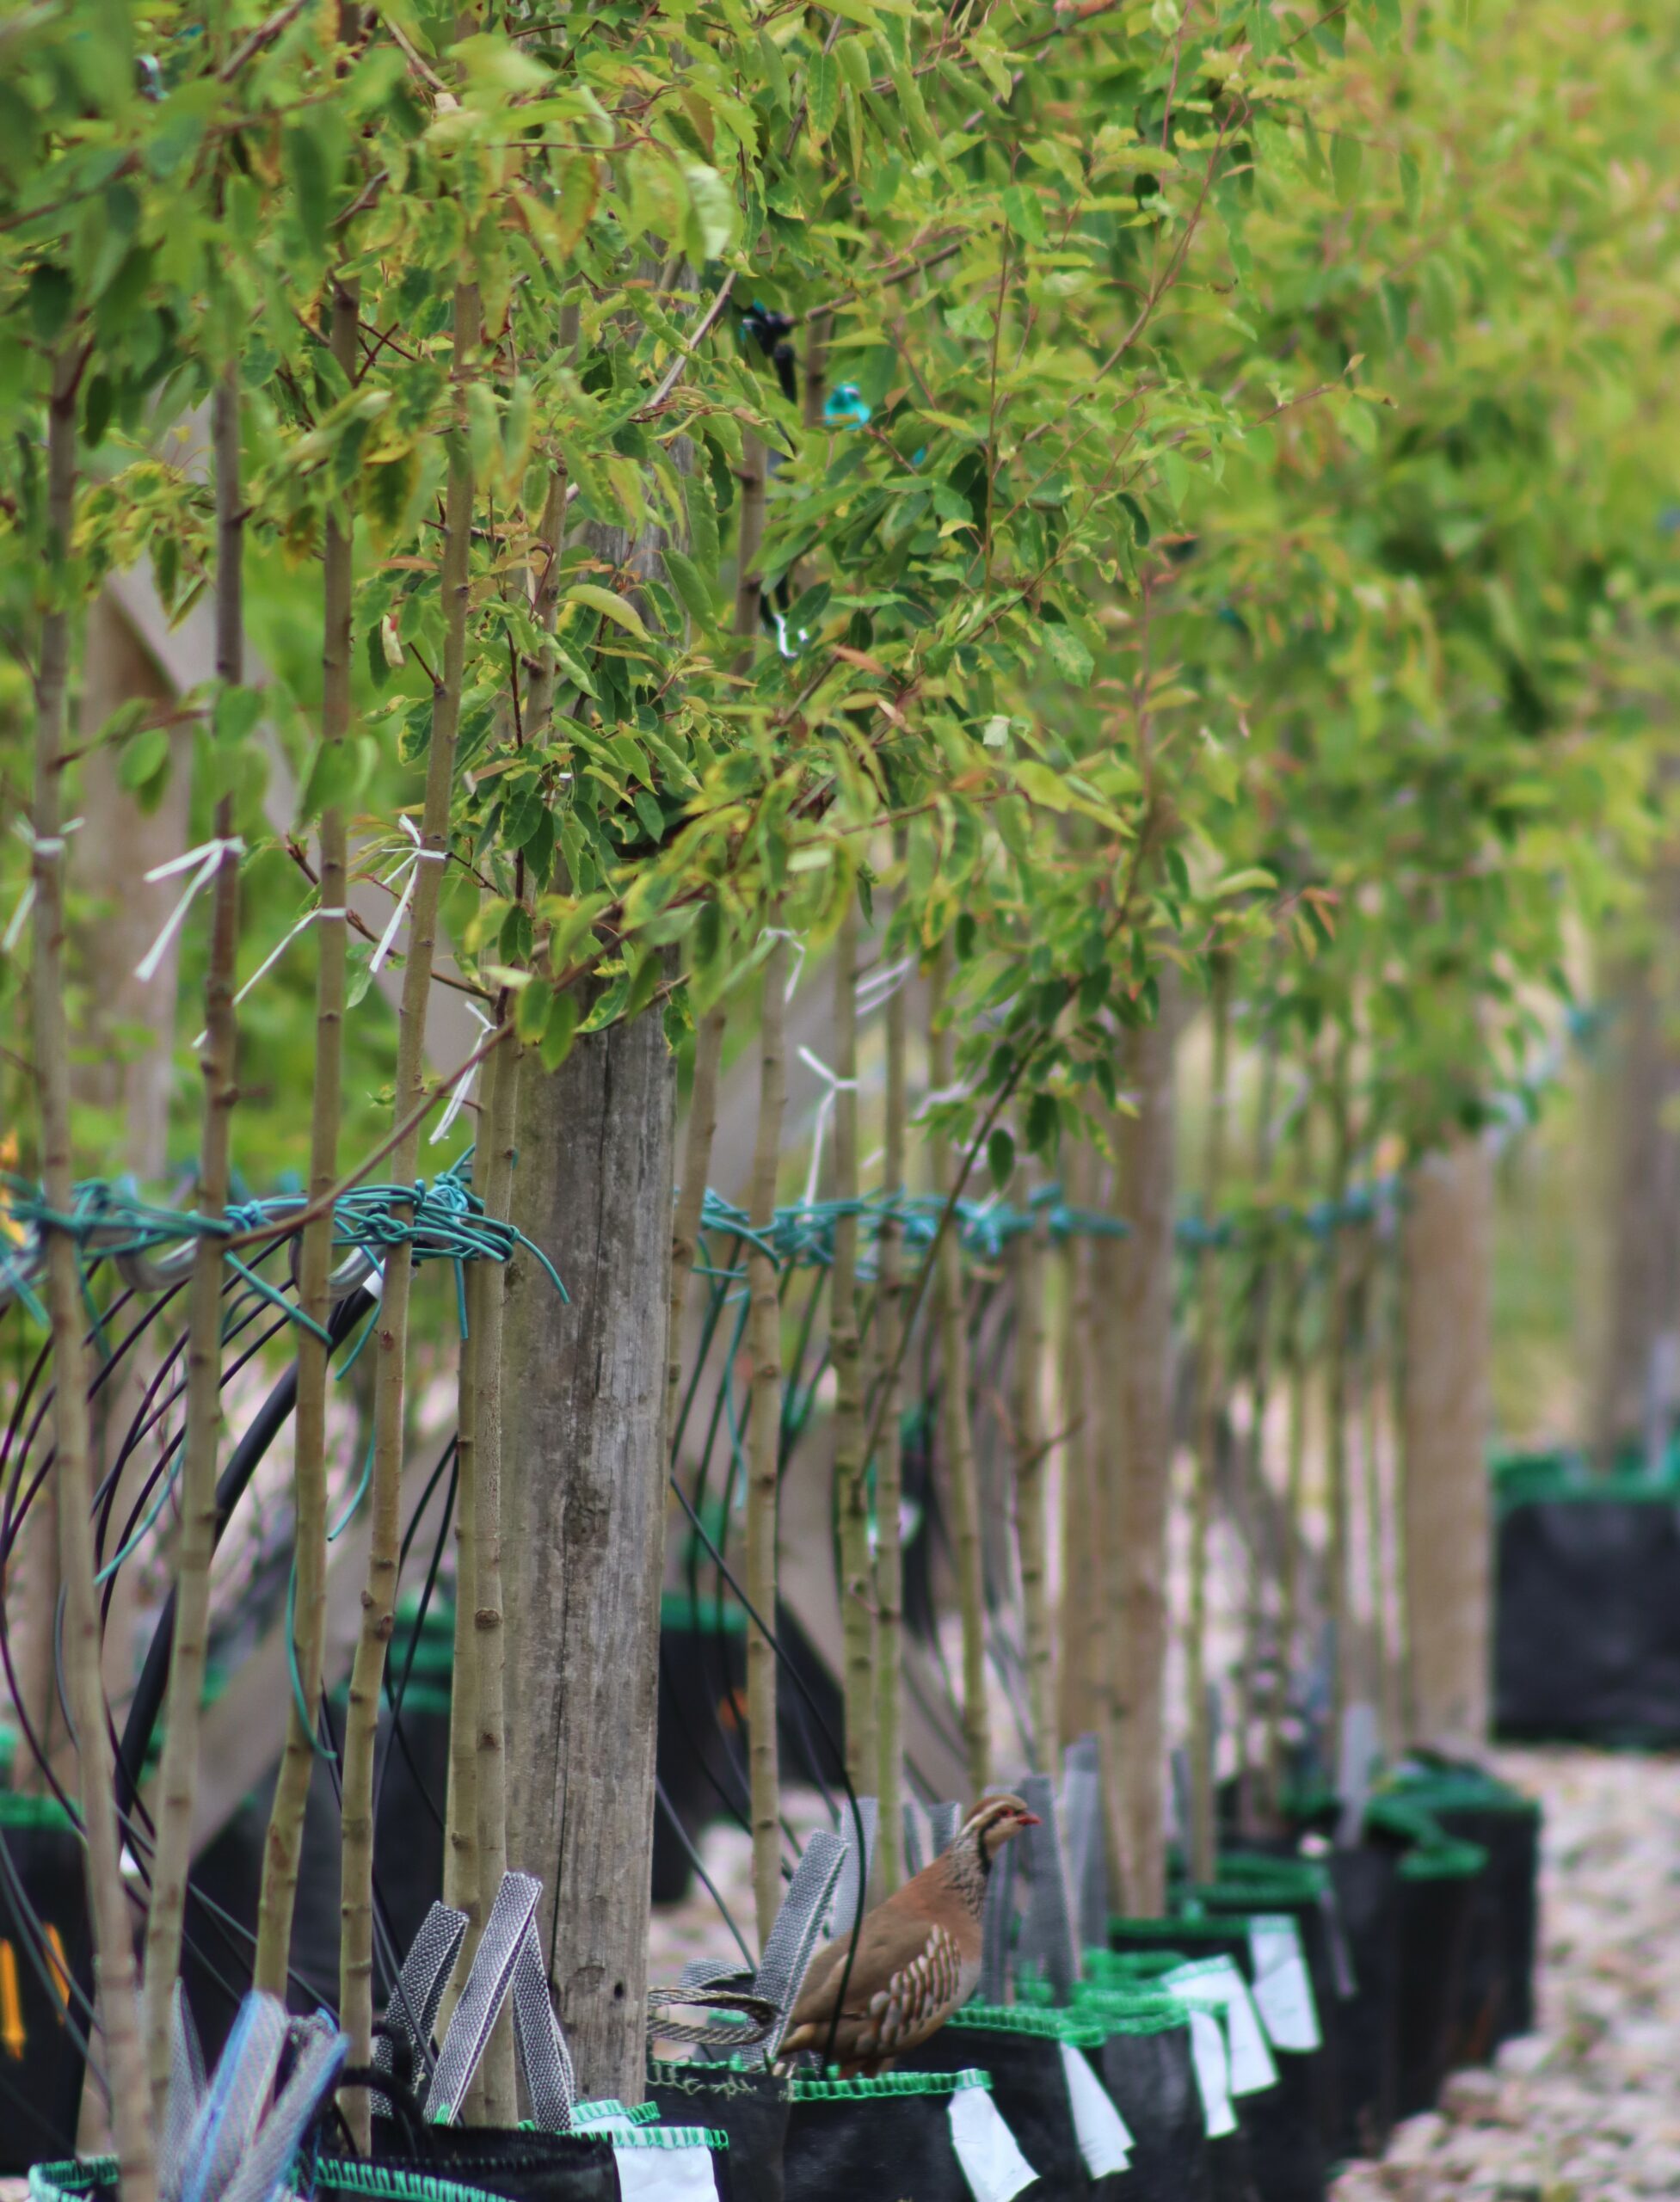 Broadmead Hillier Tree Nursery Container Trees Growing in Row